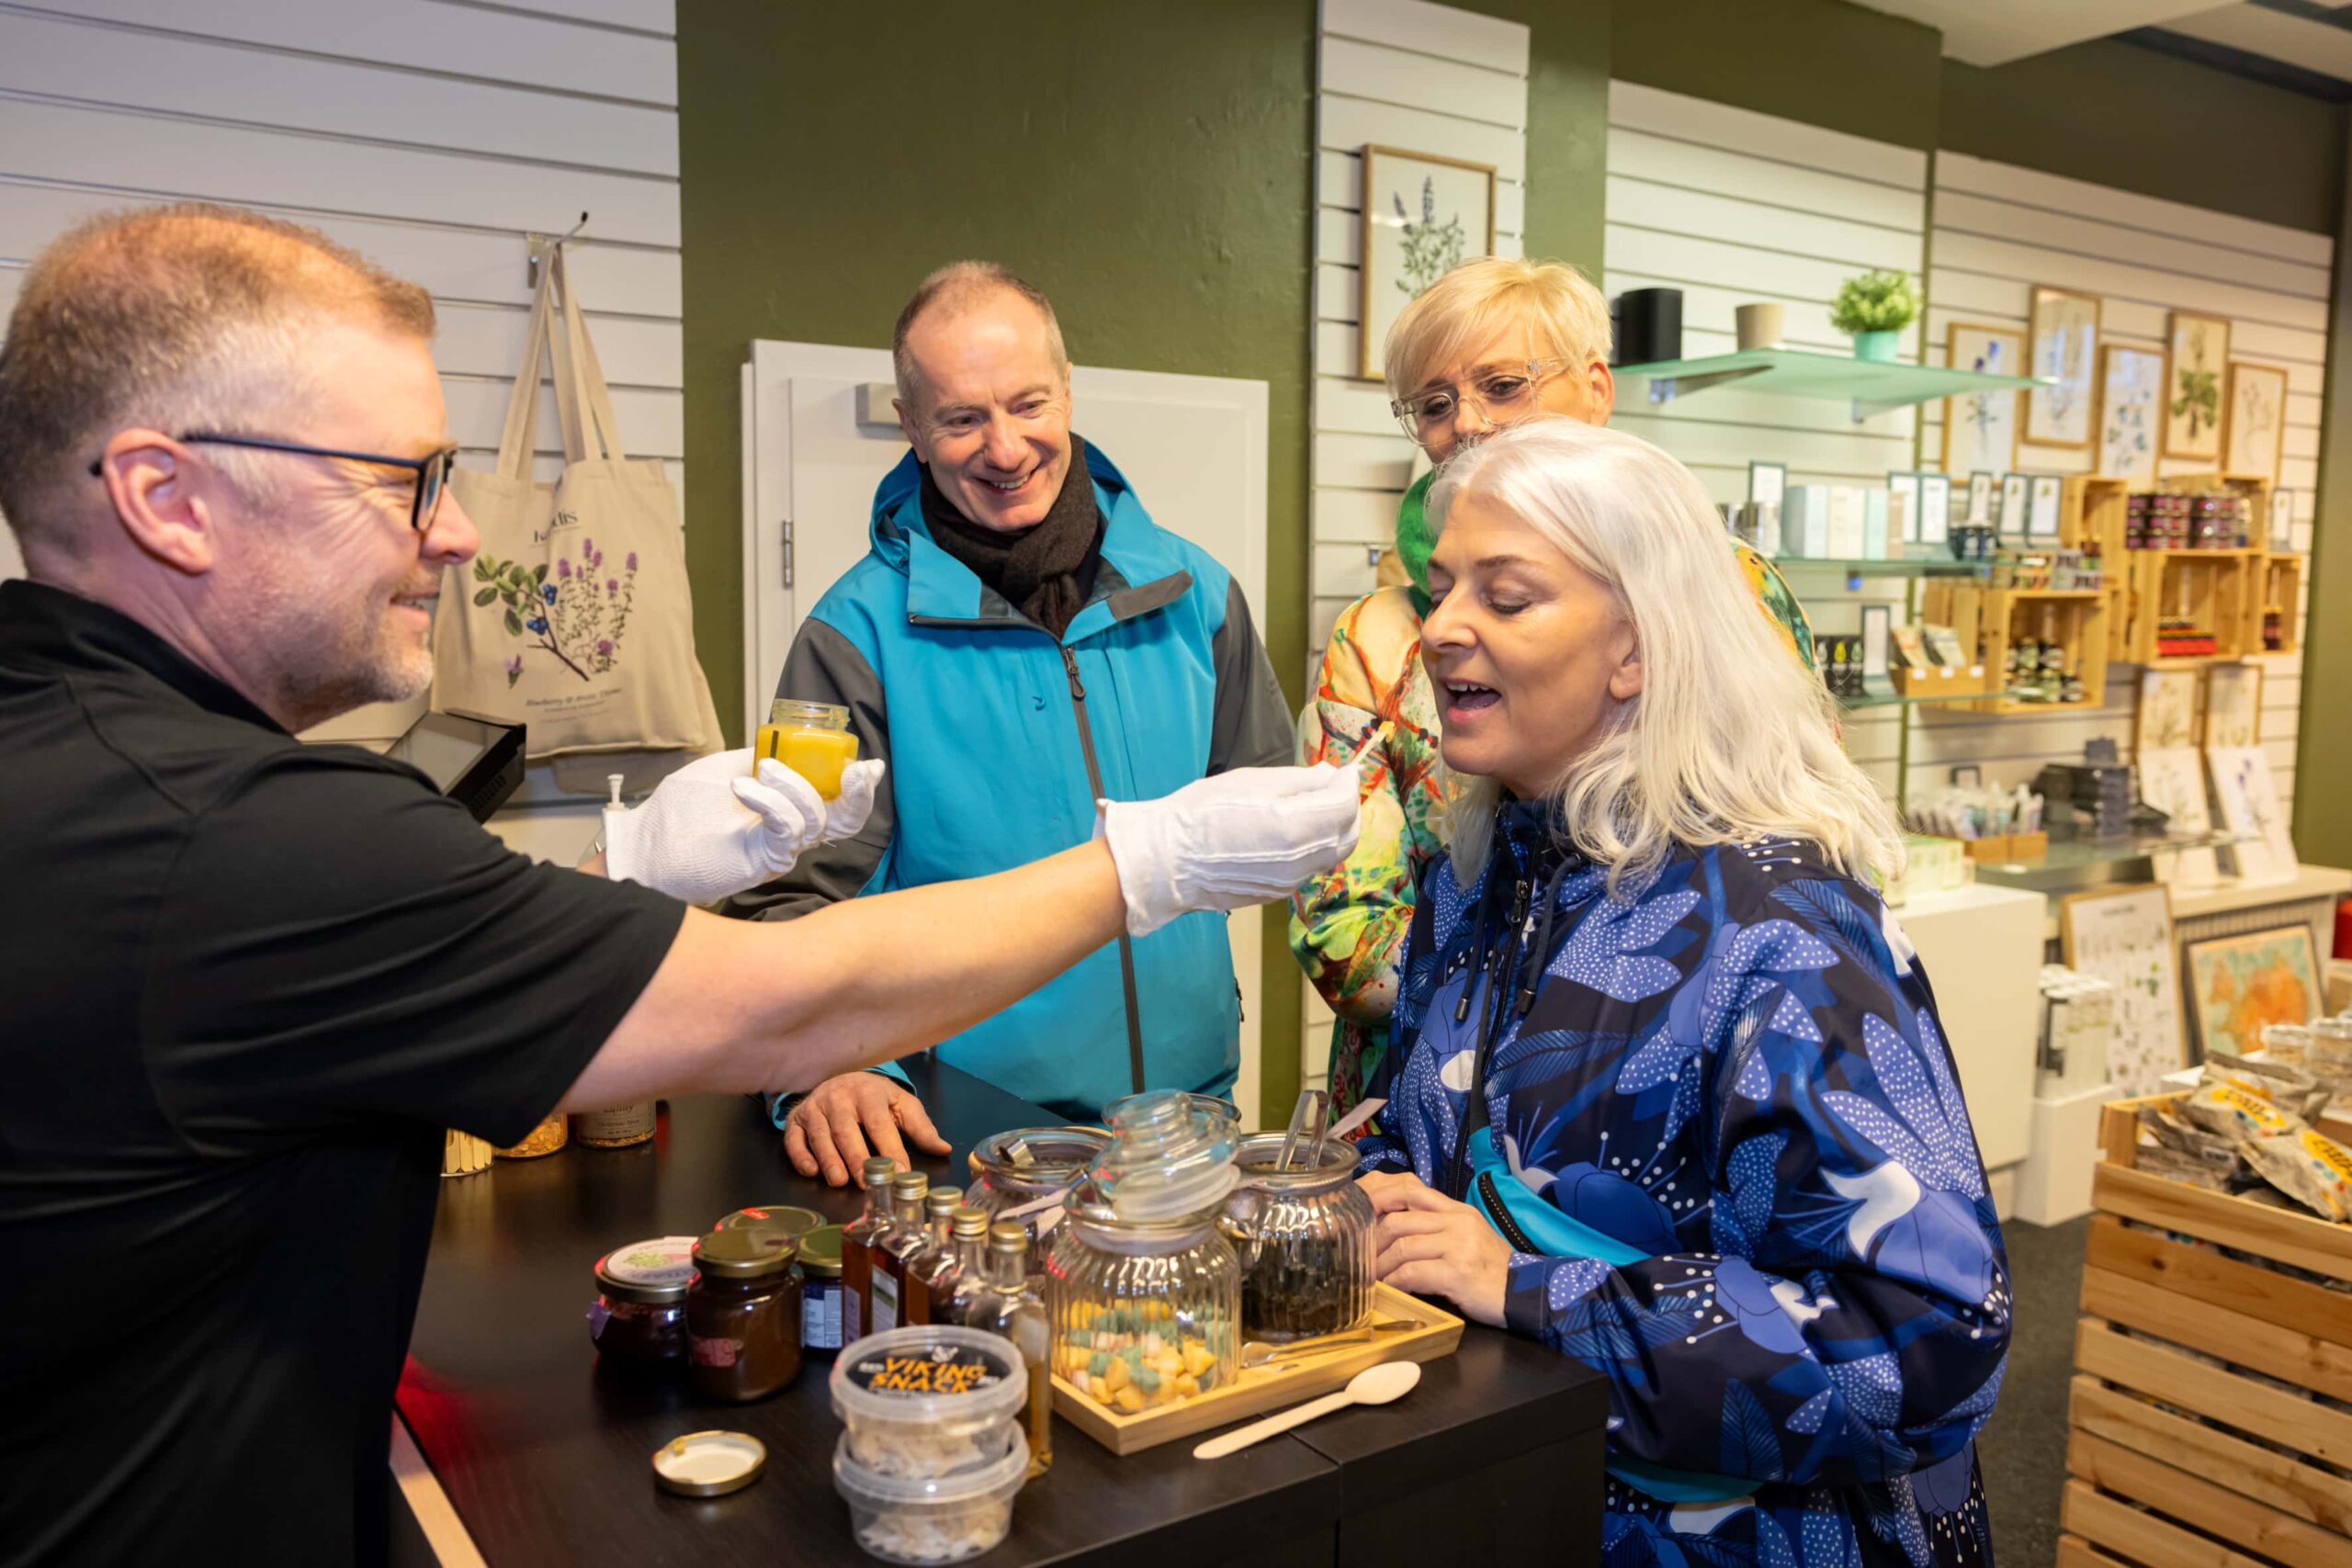 A guest tasting various Icelandic food items.